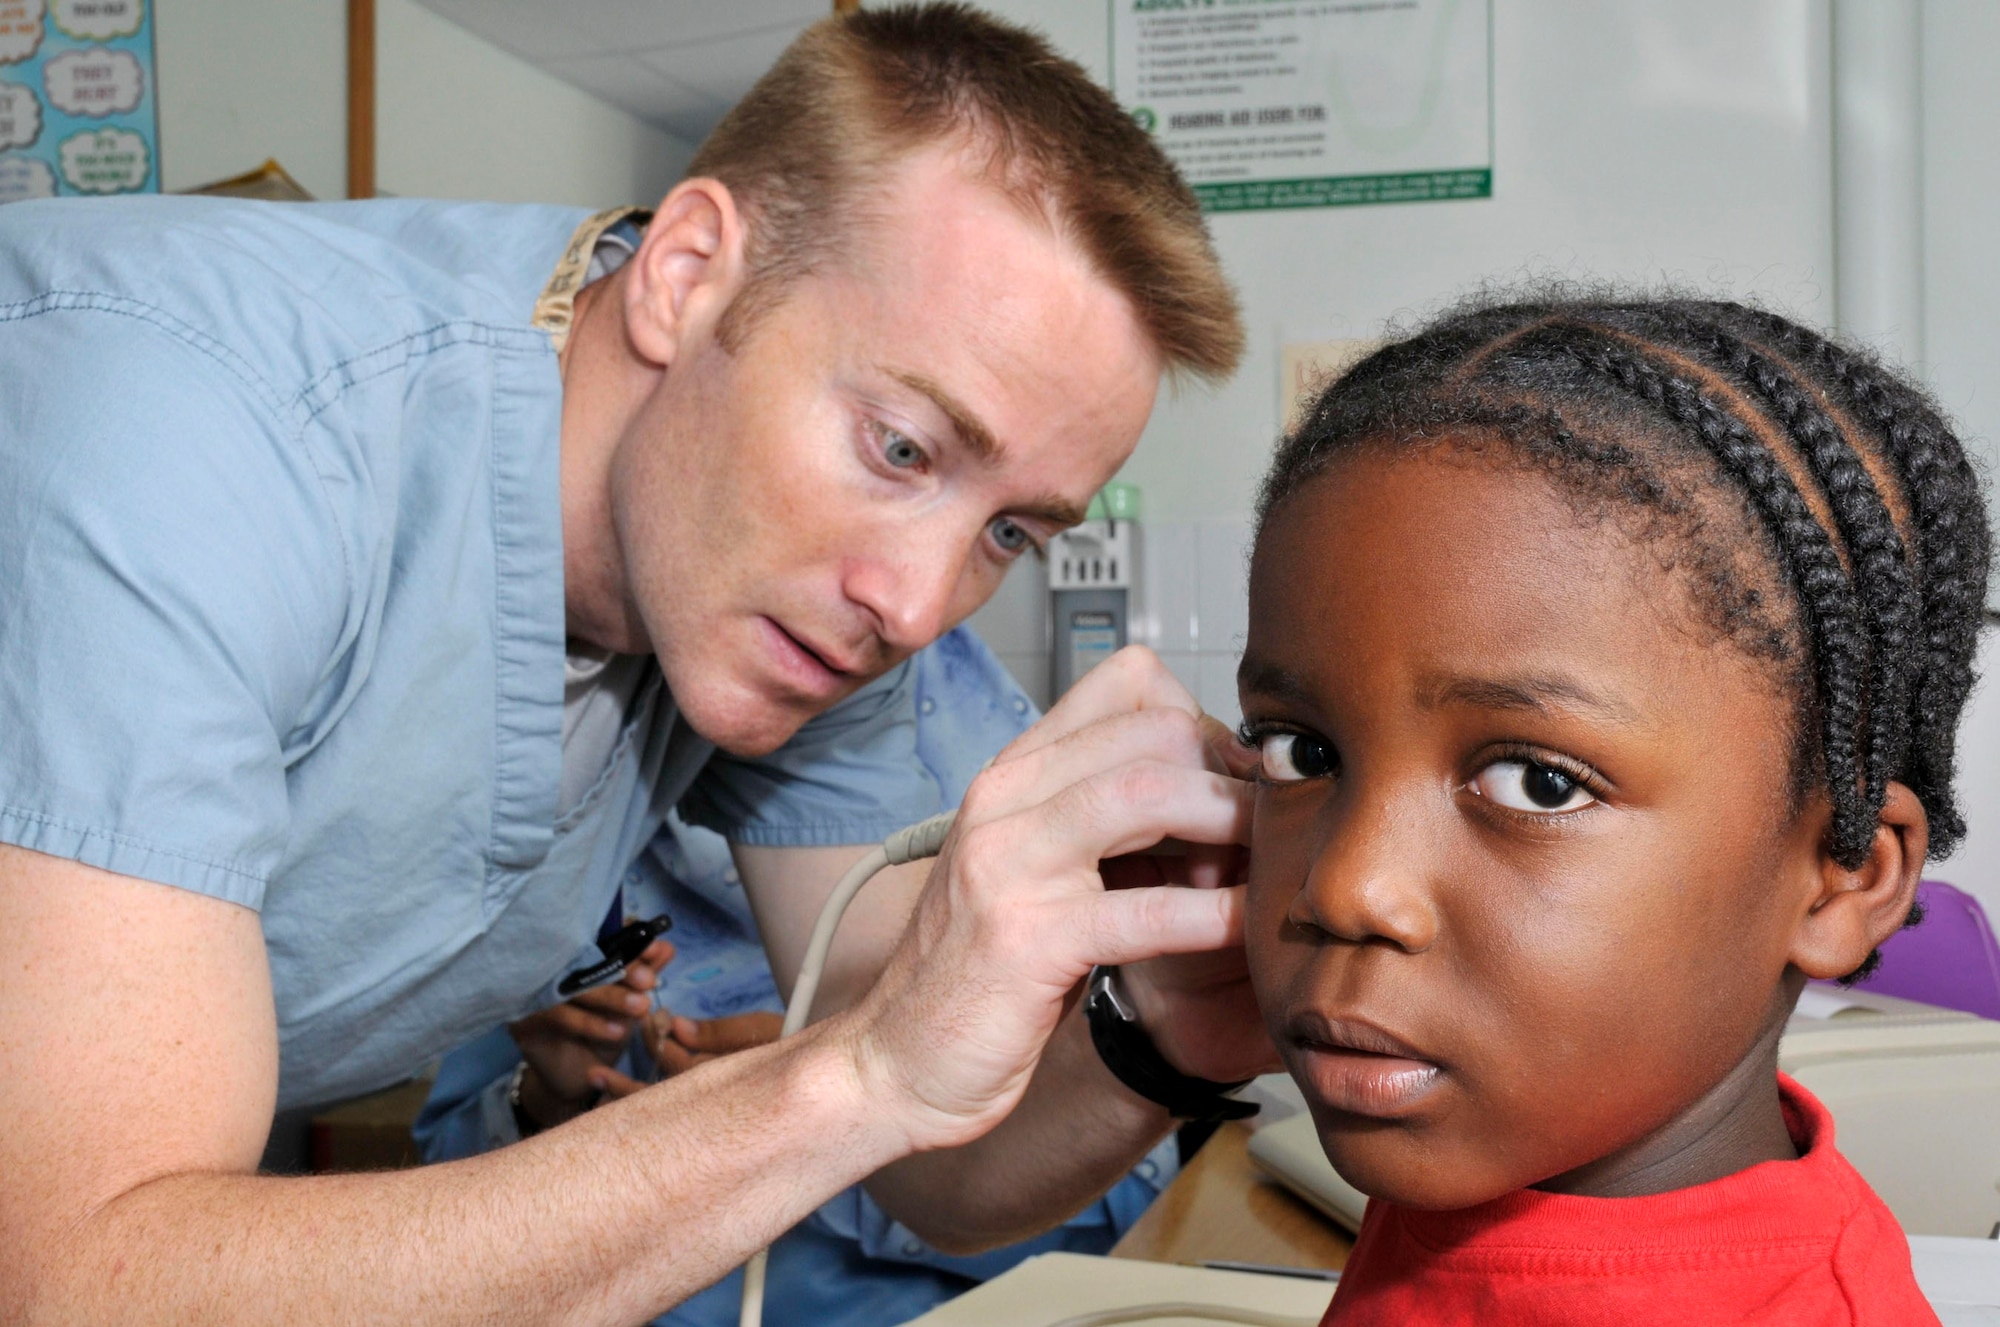 Capt. Johnny Foster uses a tympanometer to measure a Guyanese boy's eardrums Aug. 11, 2009, at the Georgetown Public Hospital in Georgetown, Guyana. Ear, nose and throat doctors deployed here will see more than 500 patients in eight days. Captain Foster is an audiologist from the 59th Medical Wing at Wilford Hall at Lackland Air Force Base, Texas. (U.S. Air Force photo/Airman 1st Class Perry Aston)